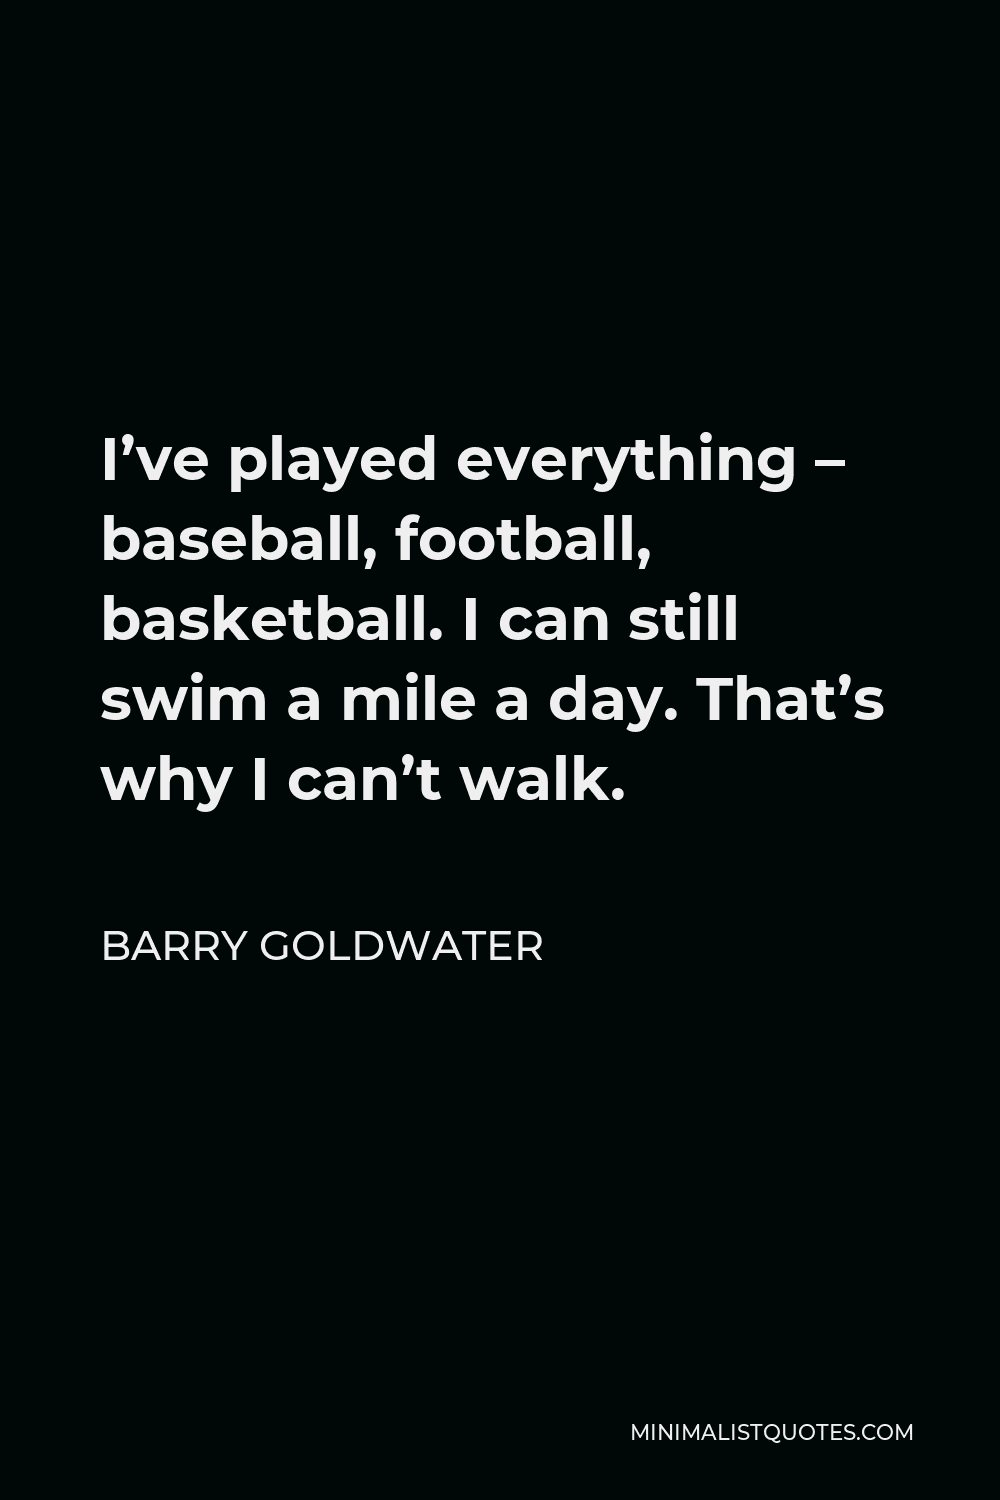 Barry Goldwater Quote - I’ve played everything – baseball, football, basketball. I can still swim a mile a day. That’s why I can’t walk.